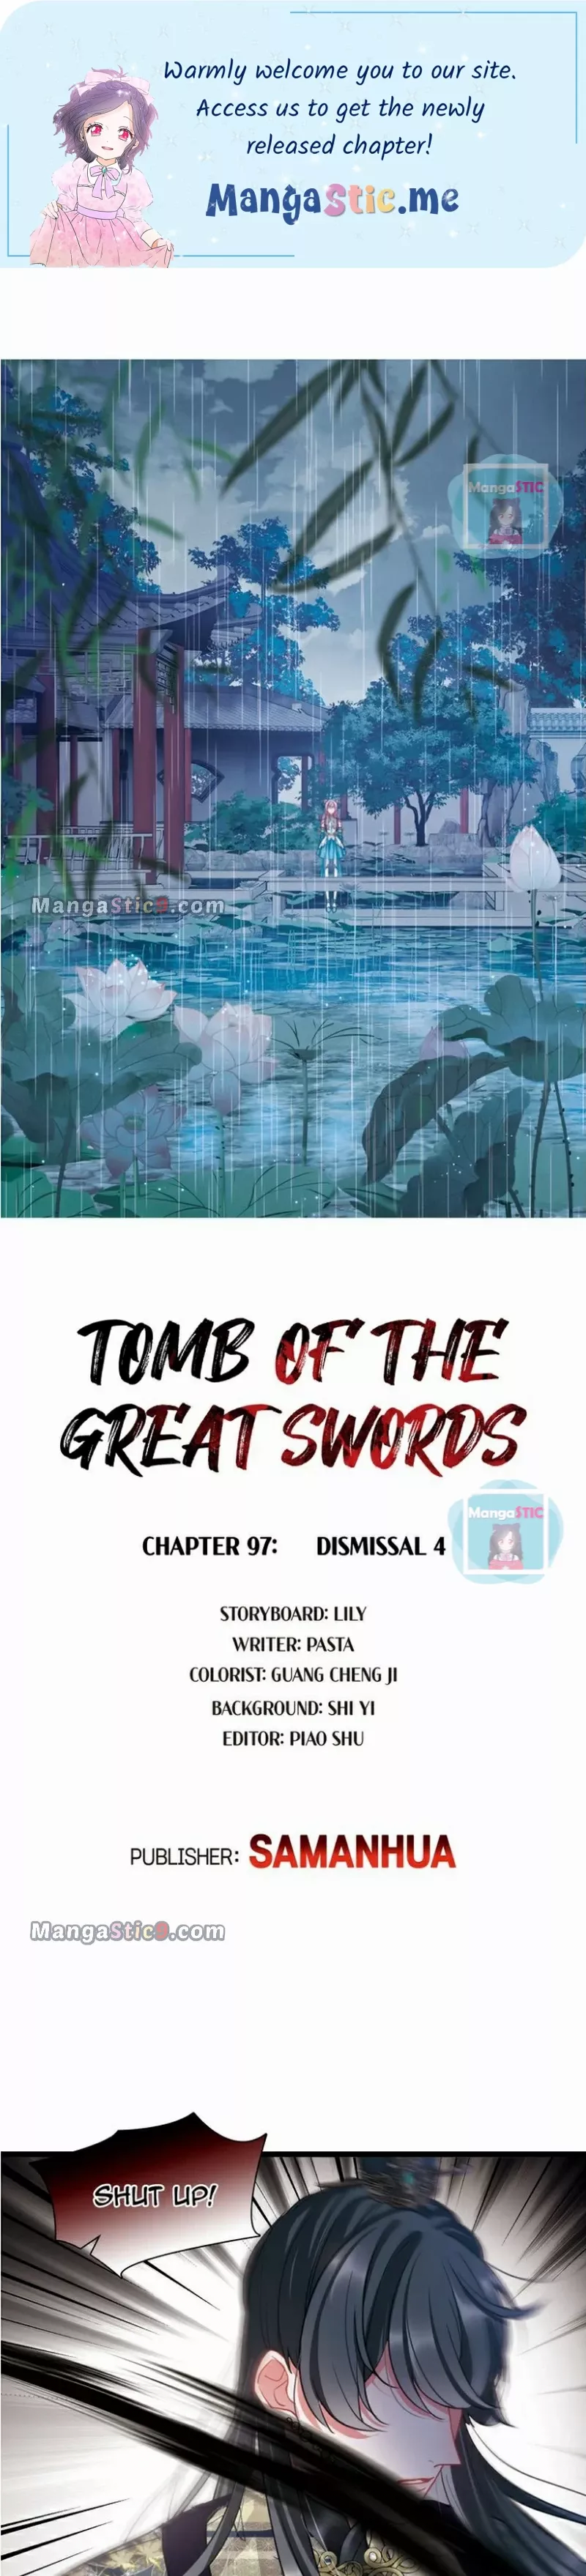 The Tomb Of Famed Swords Chapter 97 - Picture 2